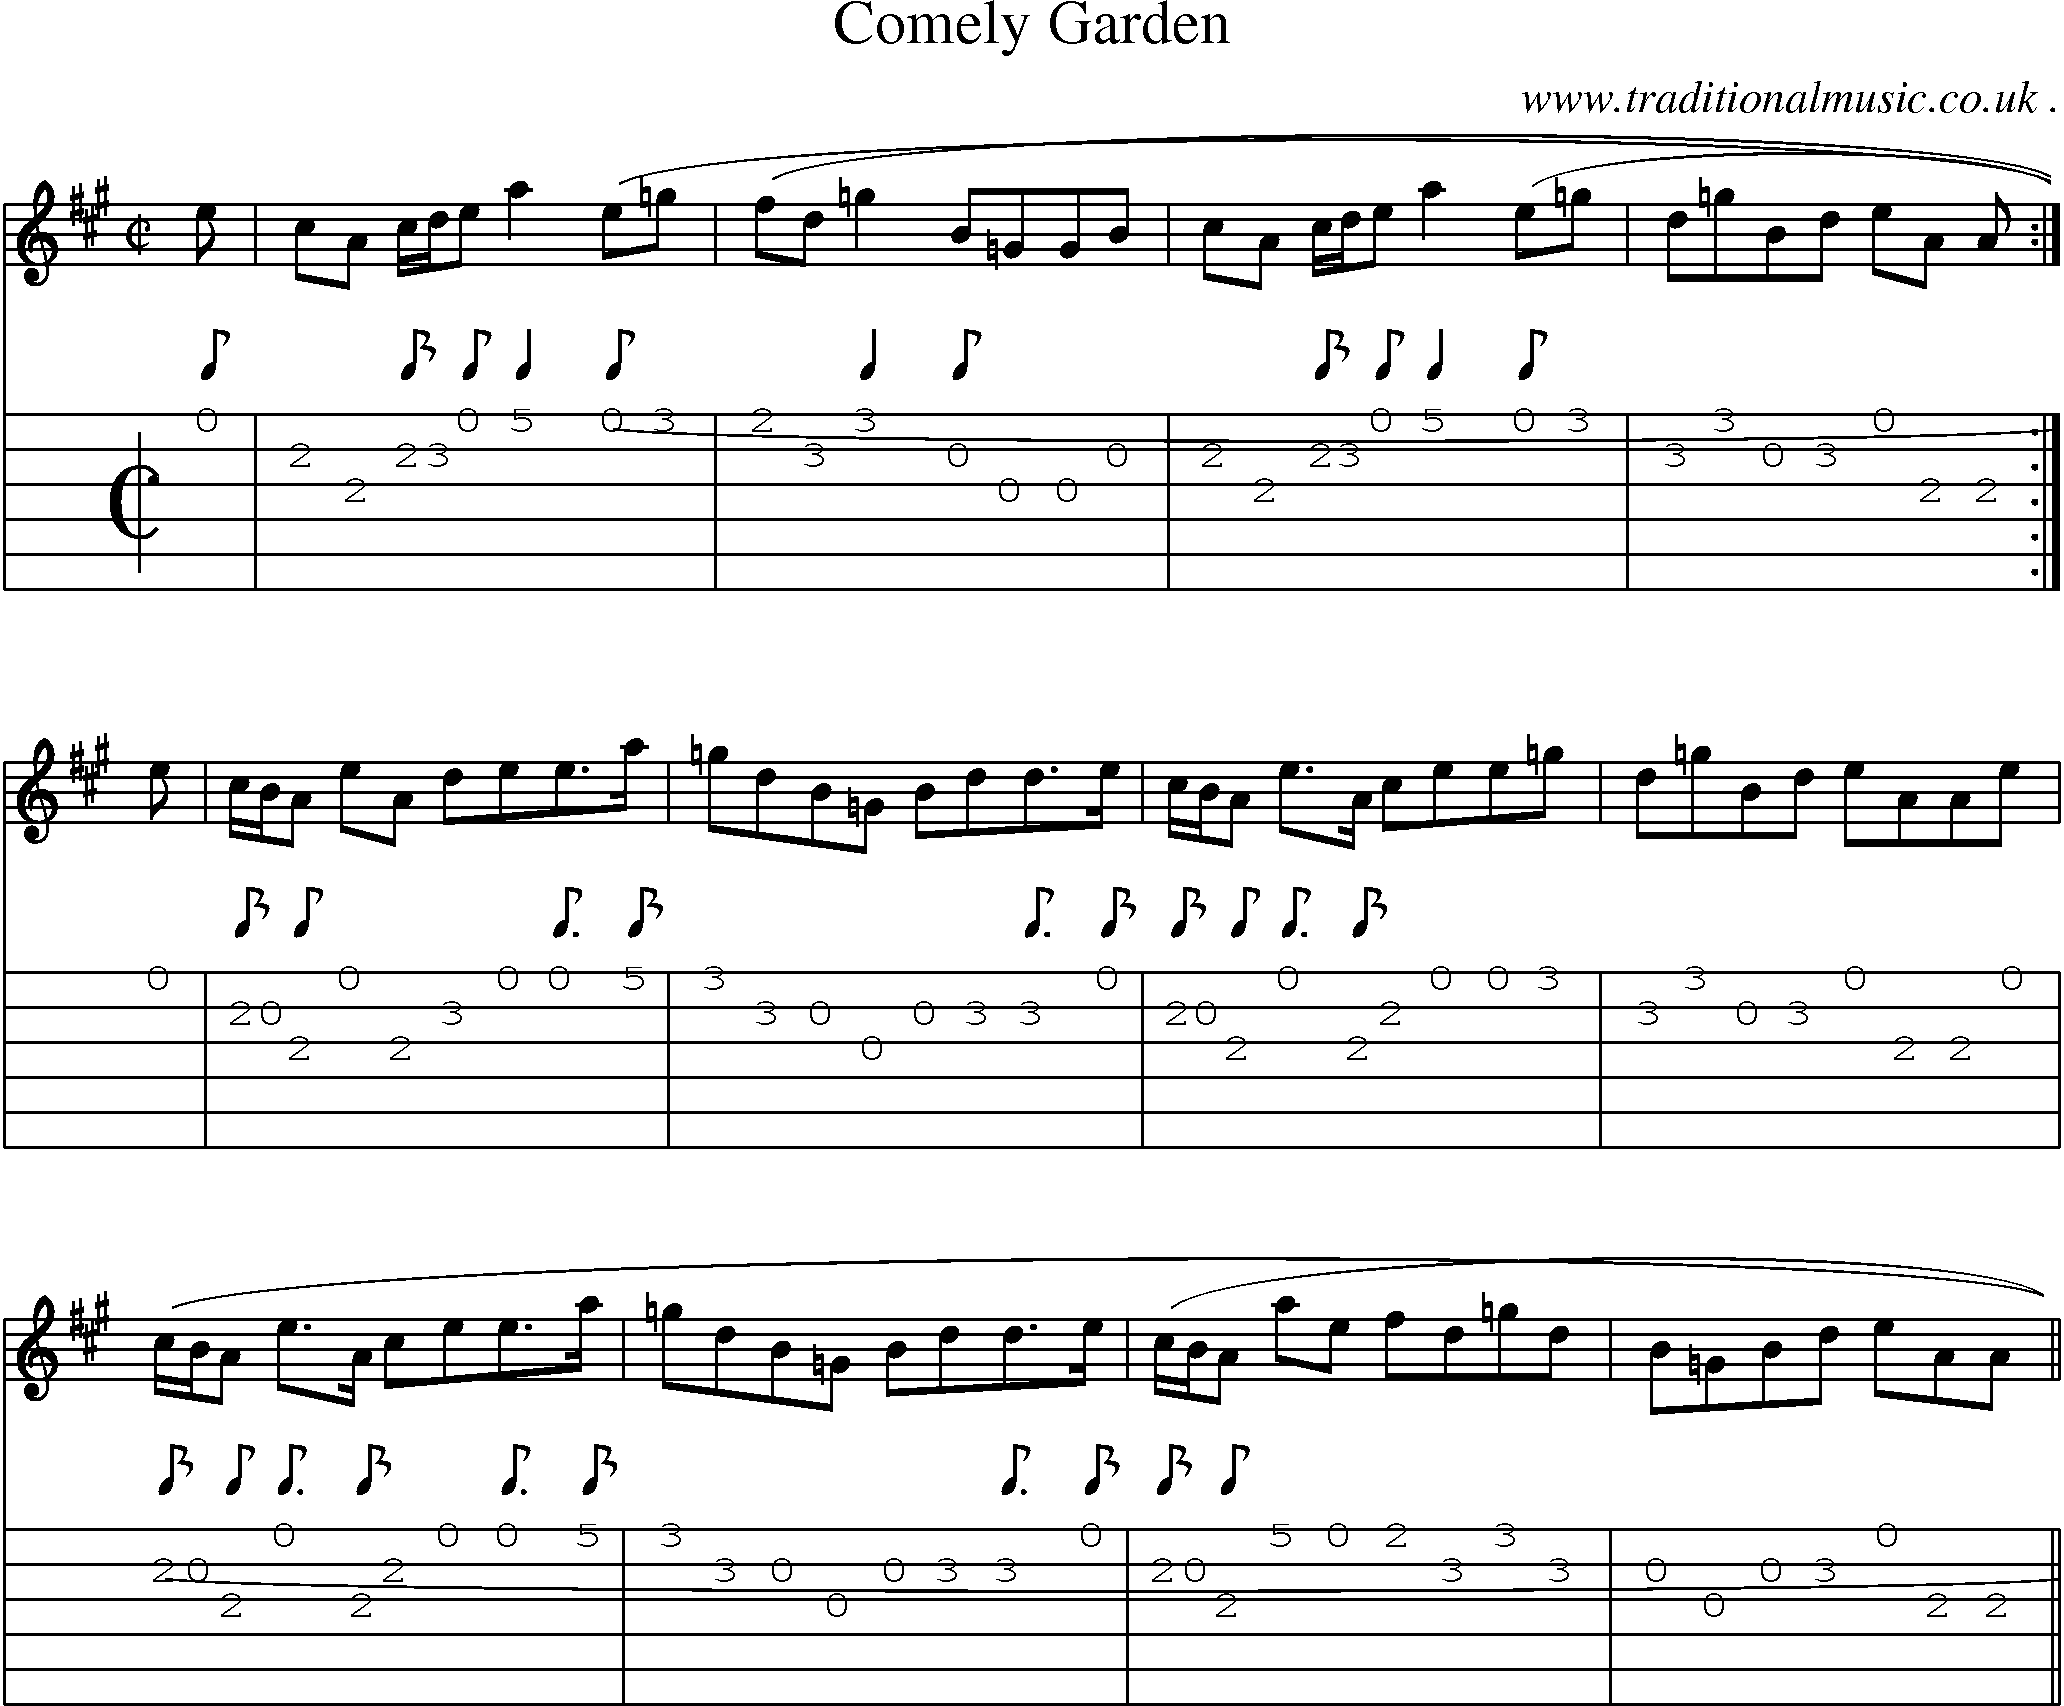 Sheet-music  score, Chords and Guitar Tabs for Comely Garden